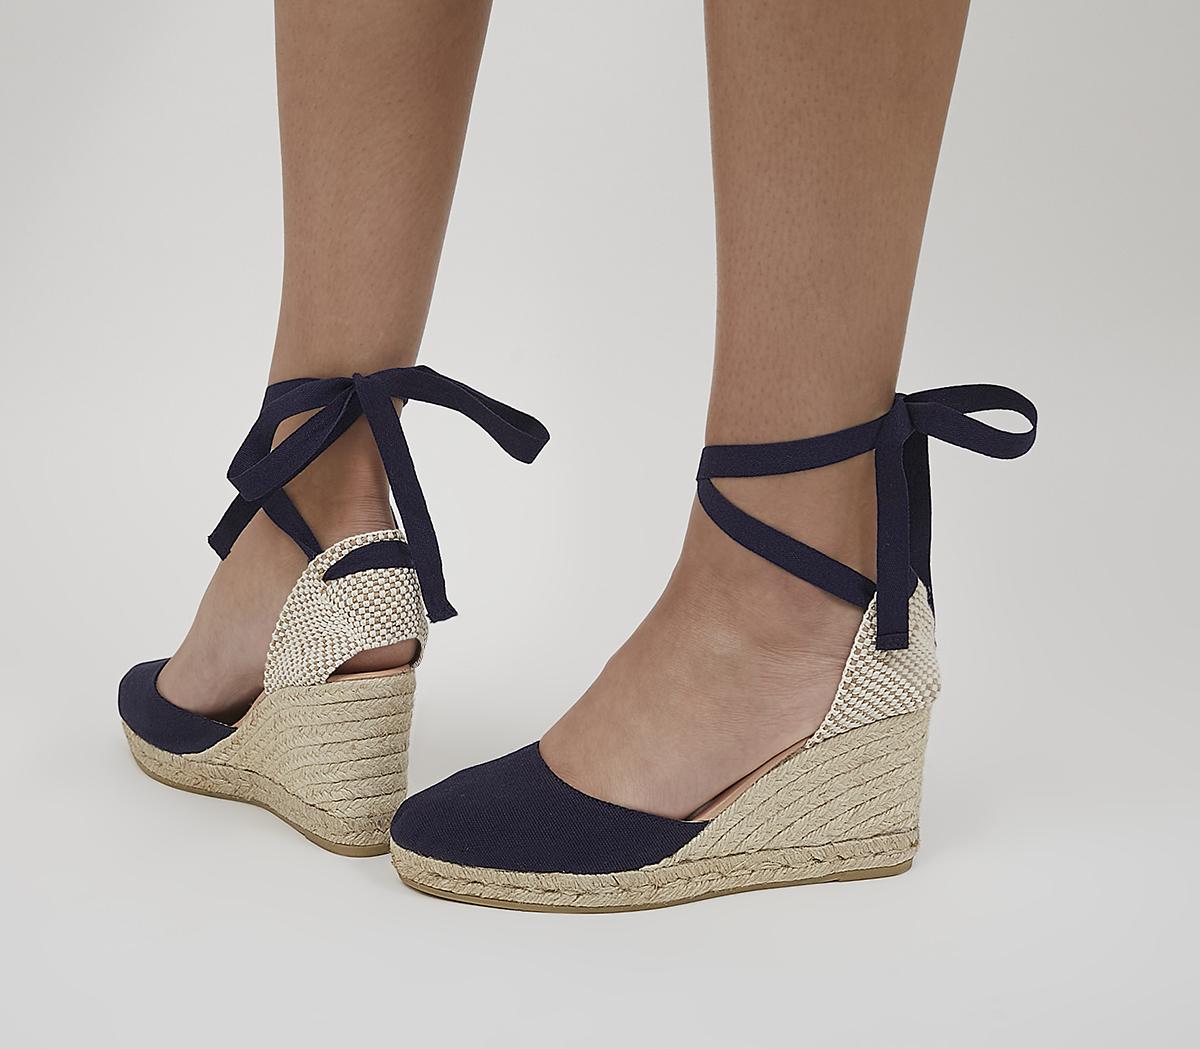 Gaimo for OFFICE Ankle Tie Espadrille Wedges Navy Canvas - Mid Heels